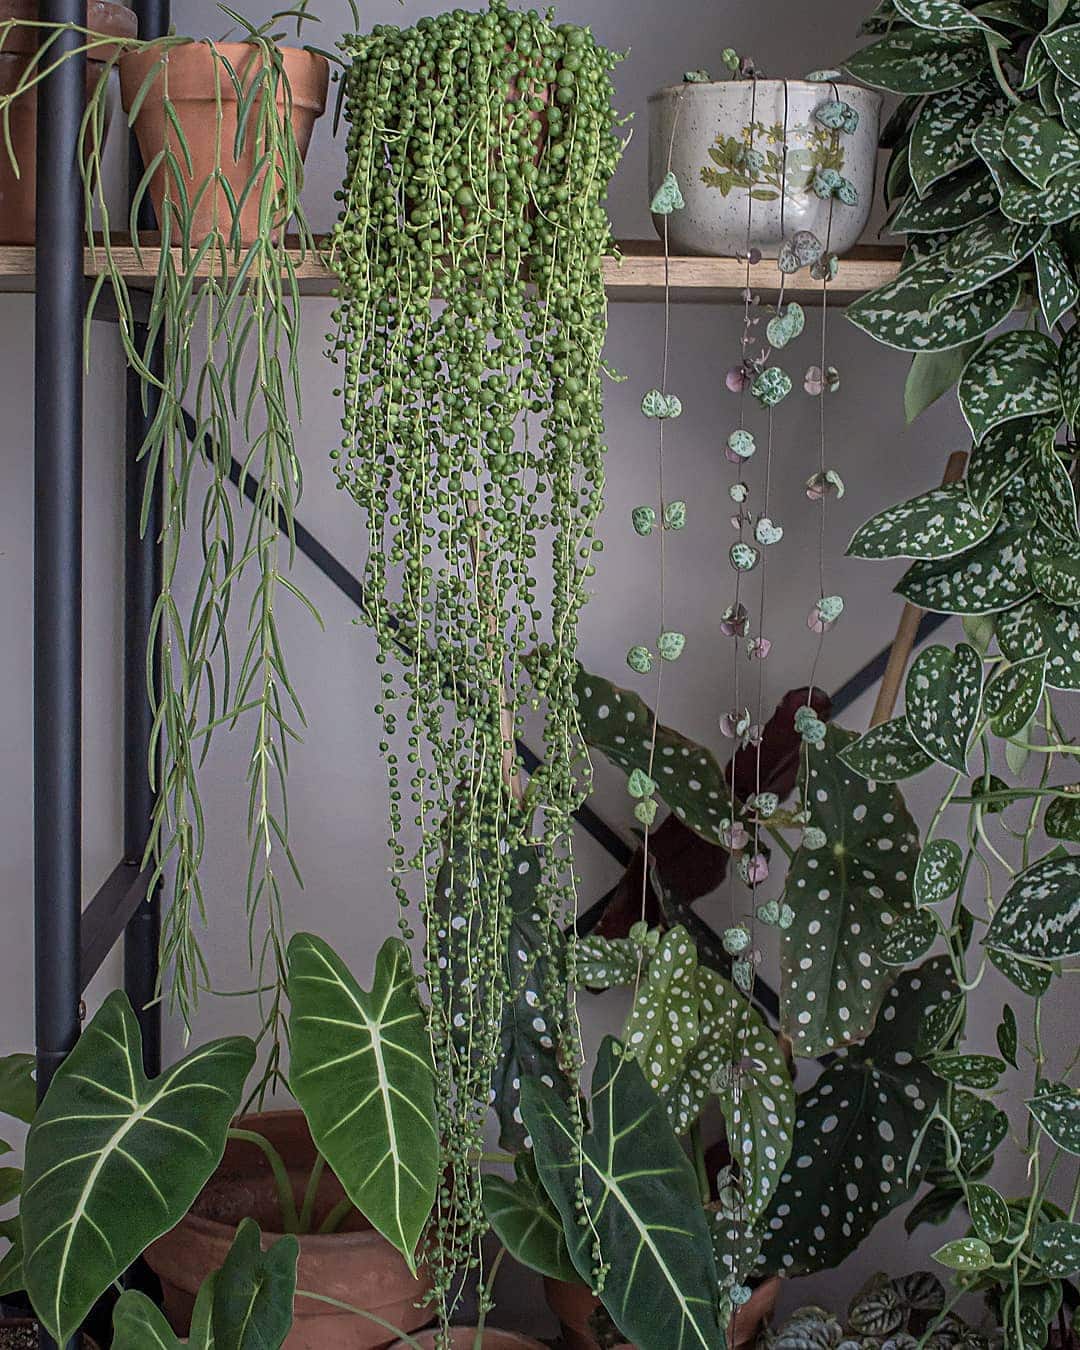 A variety of potted plants arranged on wooden shelves create a charming display. Among them are a cascading string of pearls plant, a string of hearts that makes your heart go pitter-patter, and other green, leafy plants with unique shapes and polka-dotted leaves.